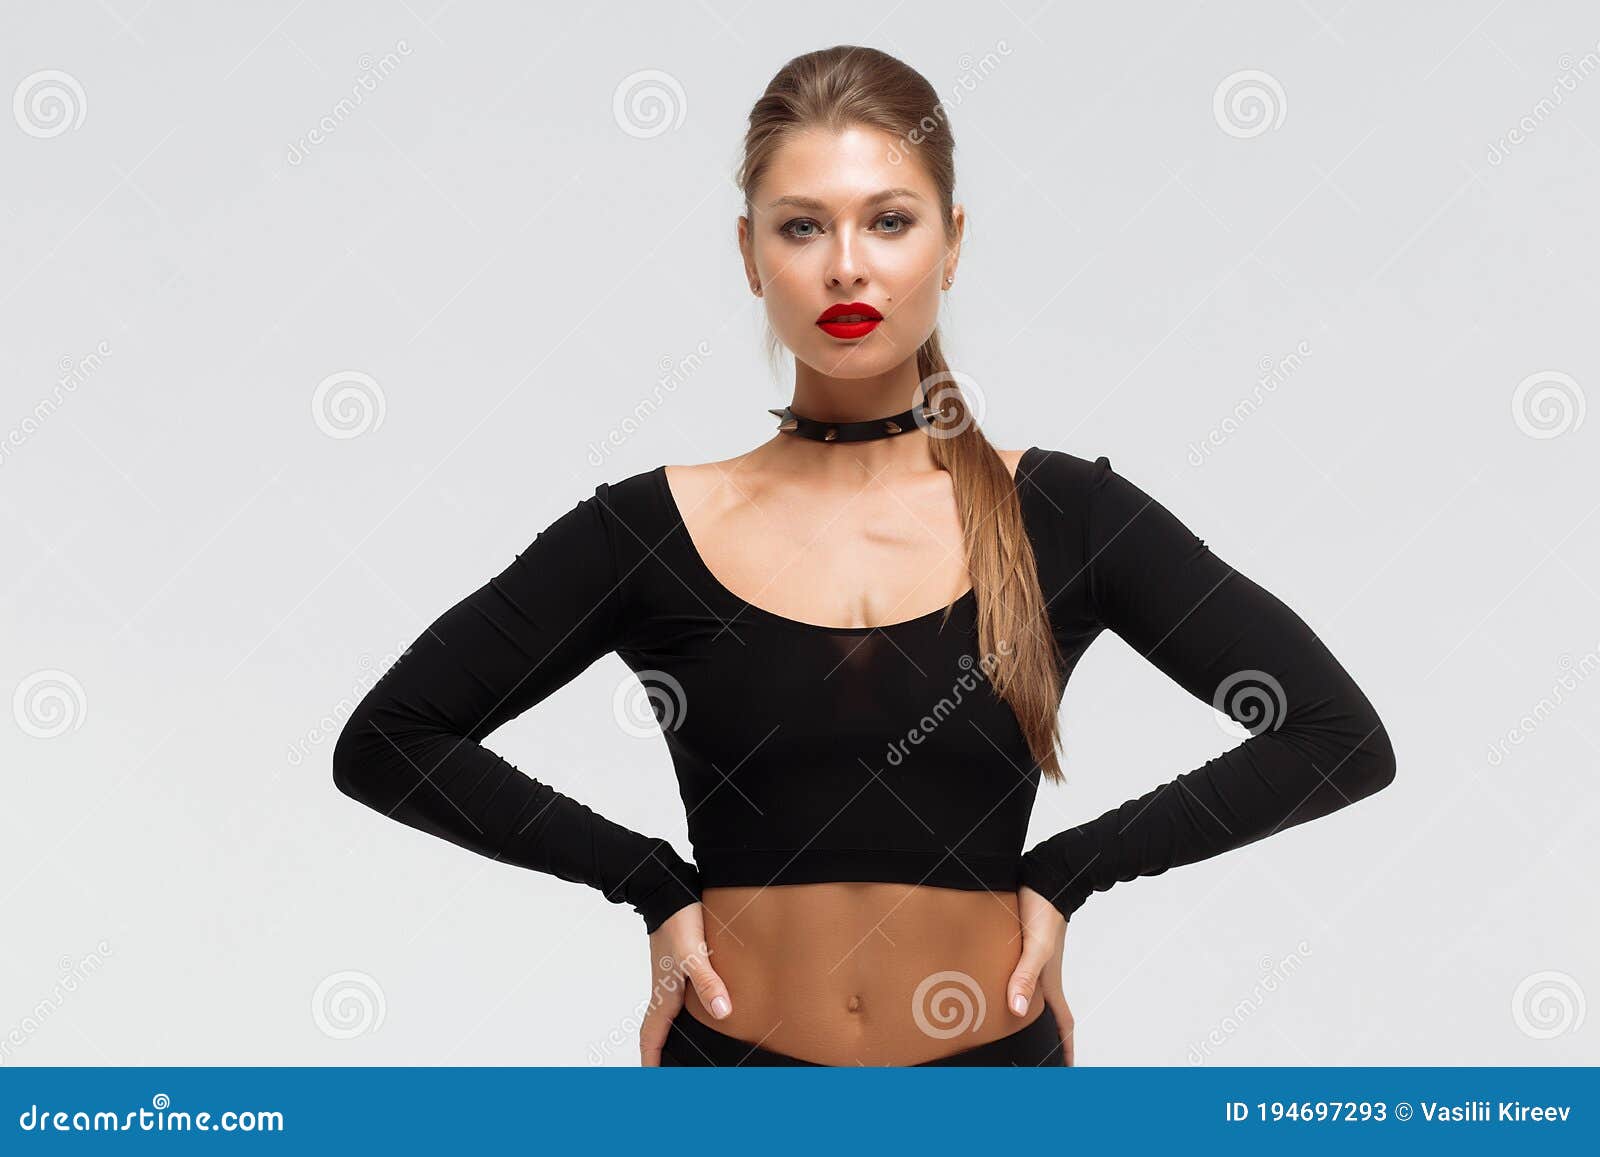 https://thumbs.dreamstime.com/z/alluring-young-woman-black-underwear-boots-full-body-provocative-slim-female-red-lips-wearing-high-heeled-standing-194697293.jpg